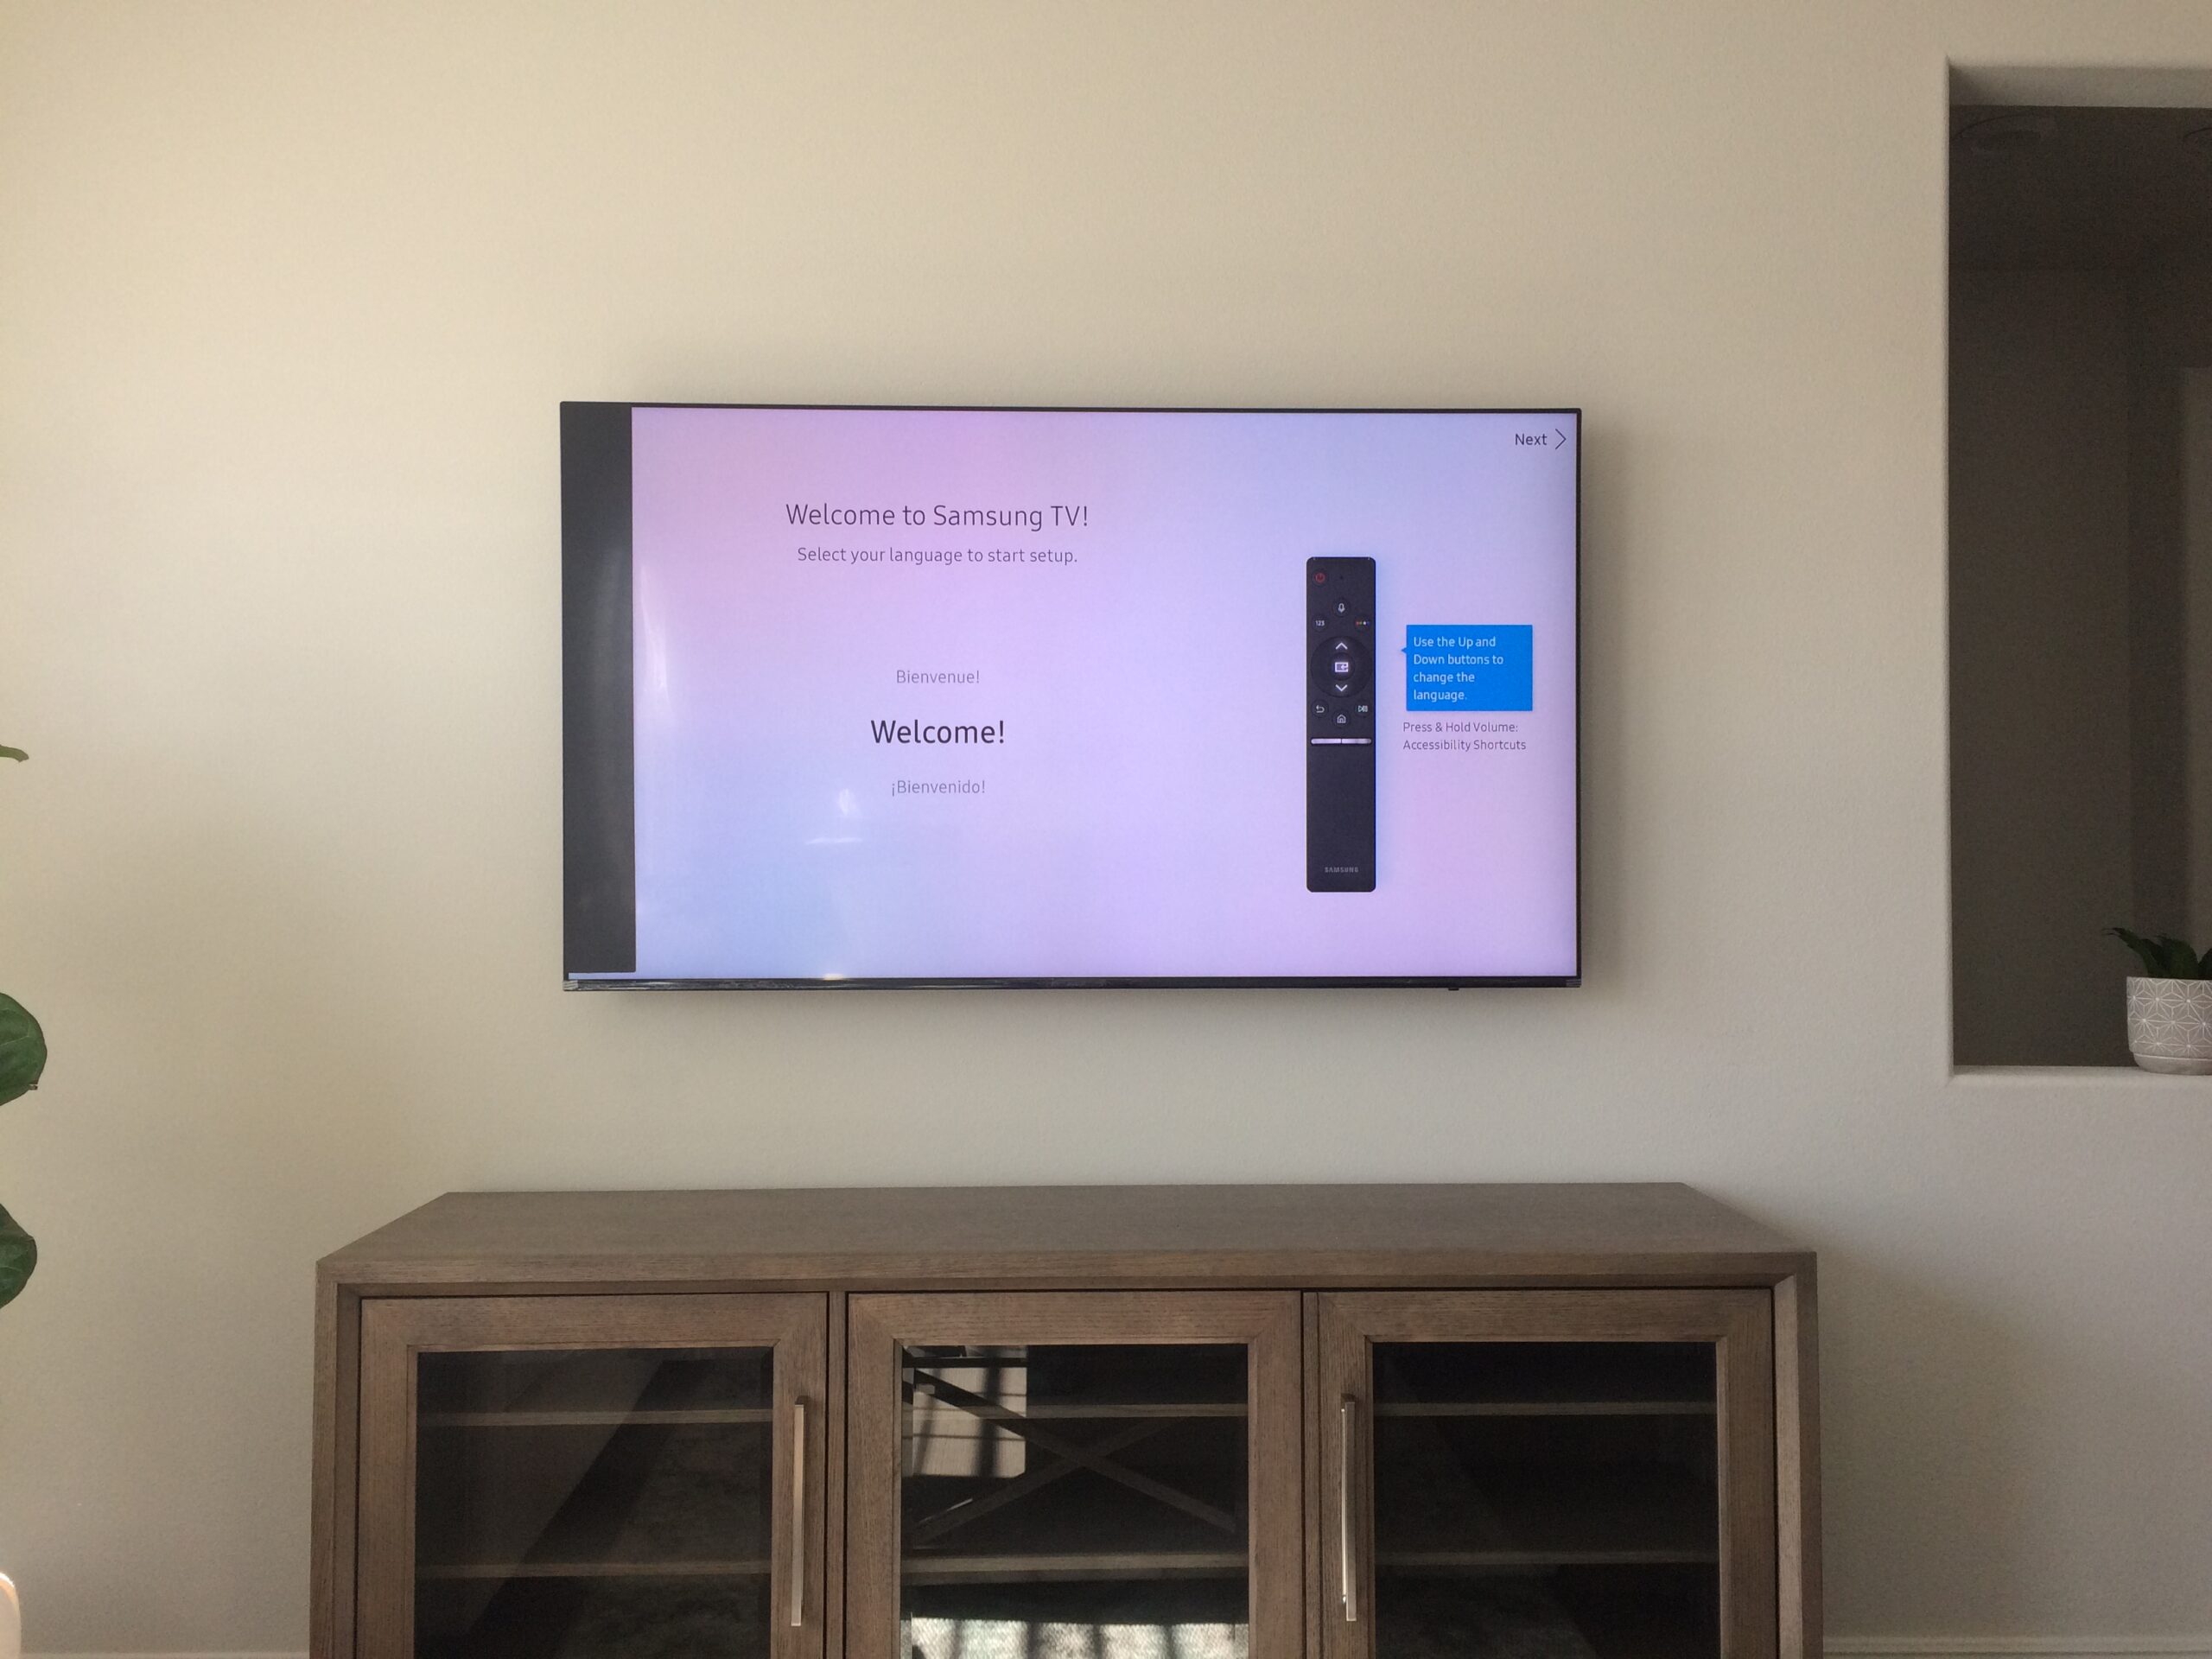 tv mounting service